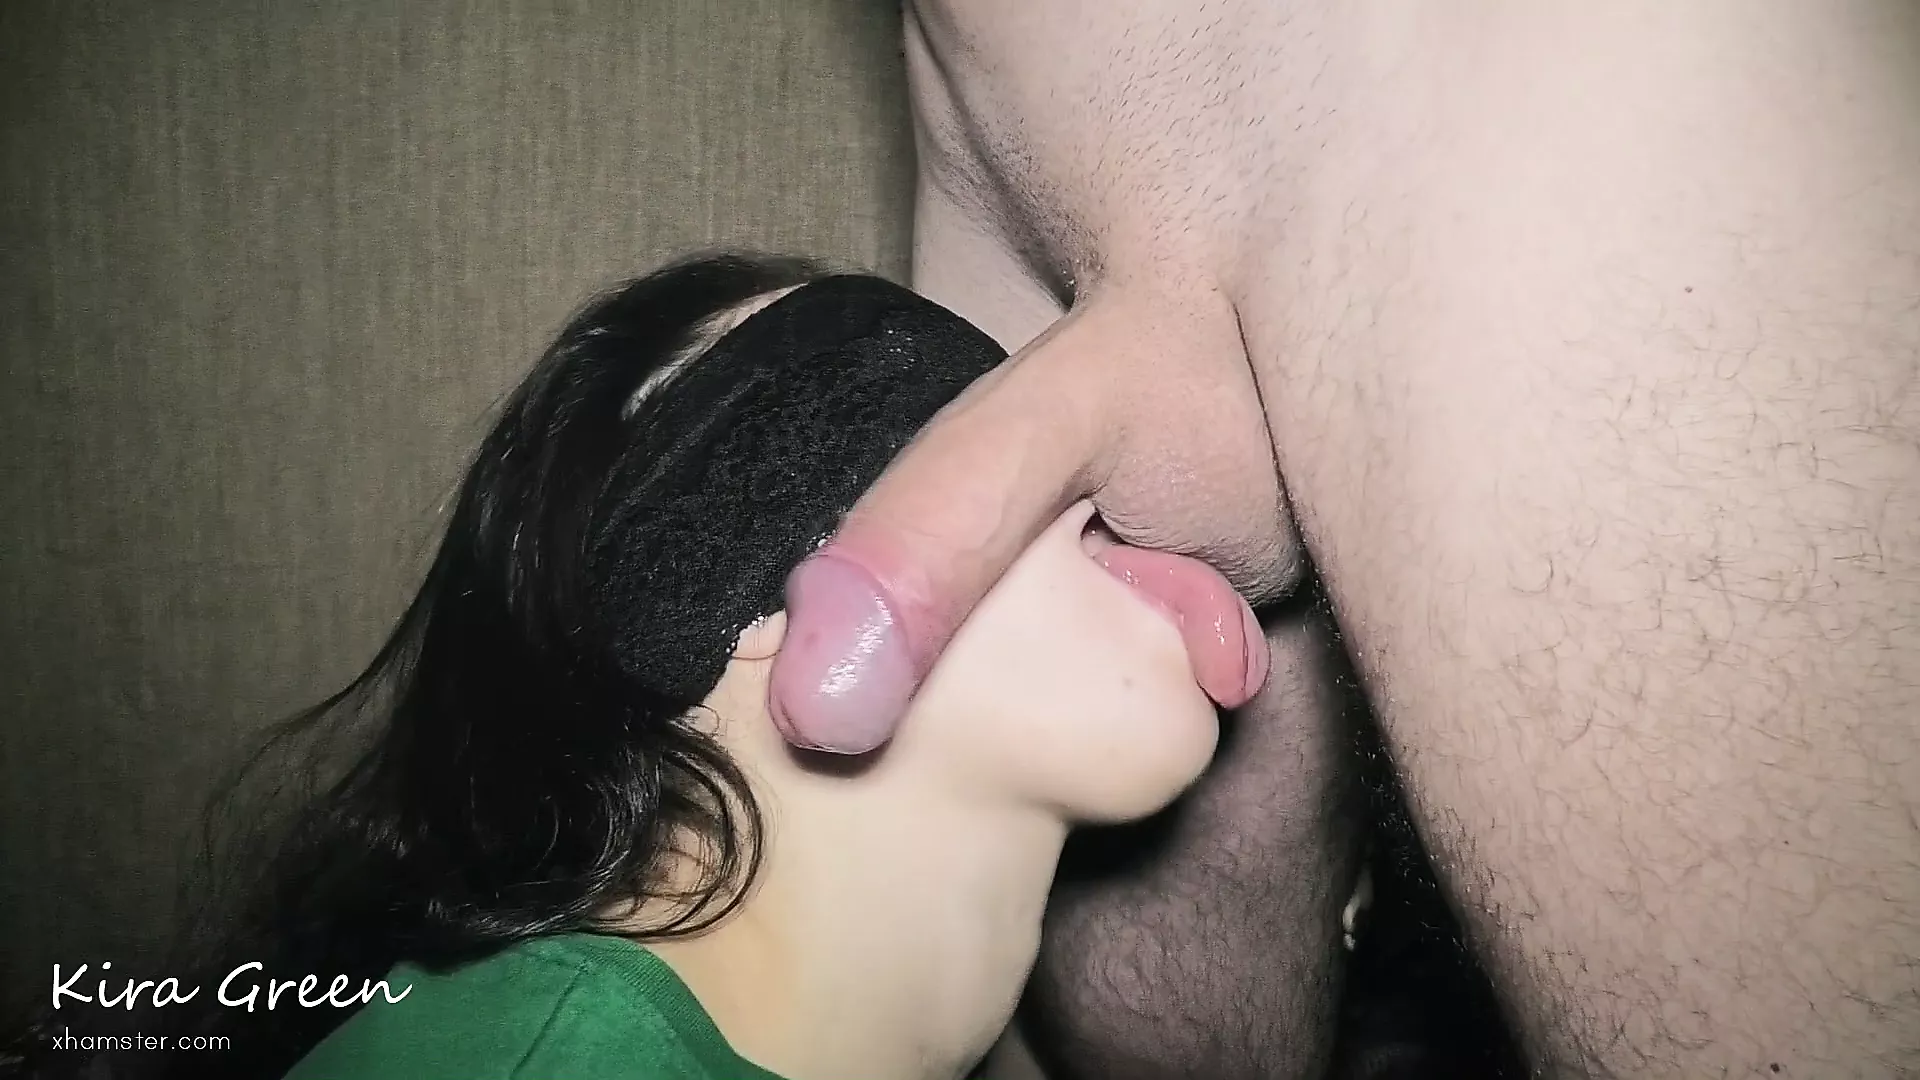 Blowjob and Rimming, licking and sucking balls, threesome picture